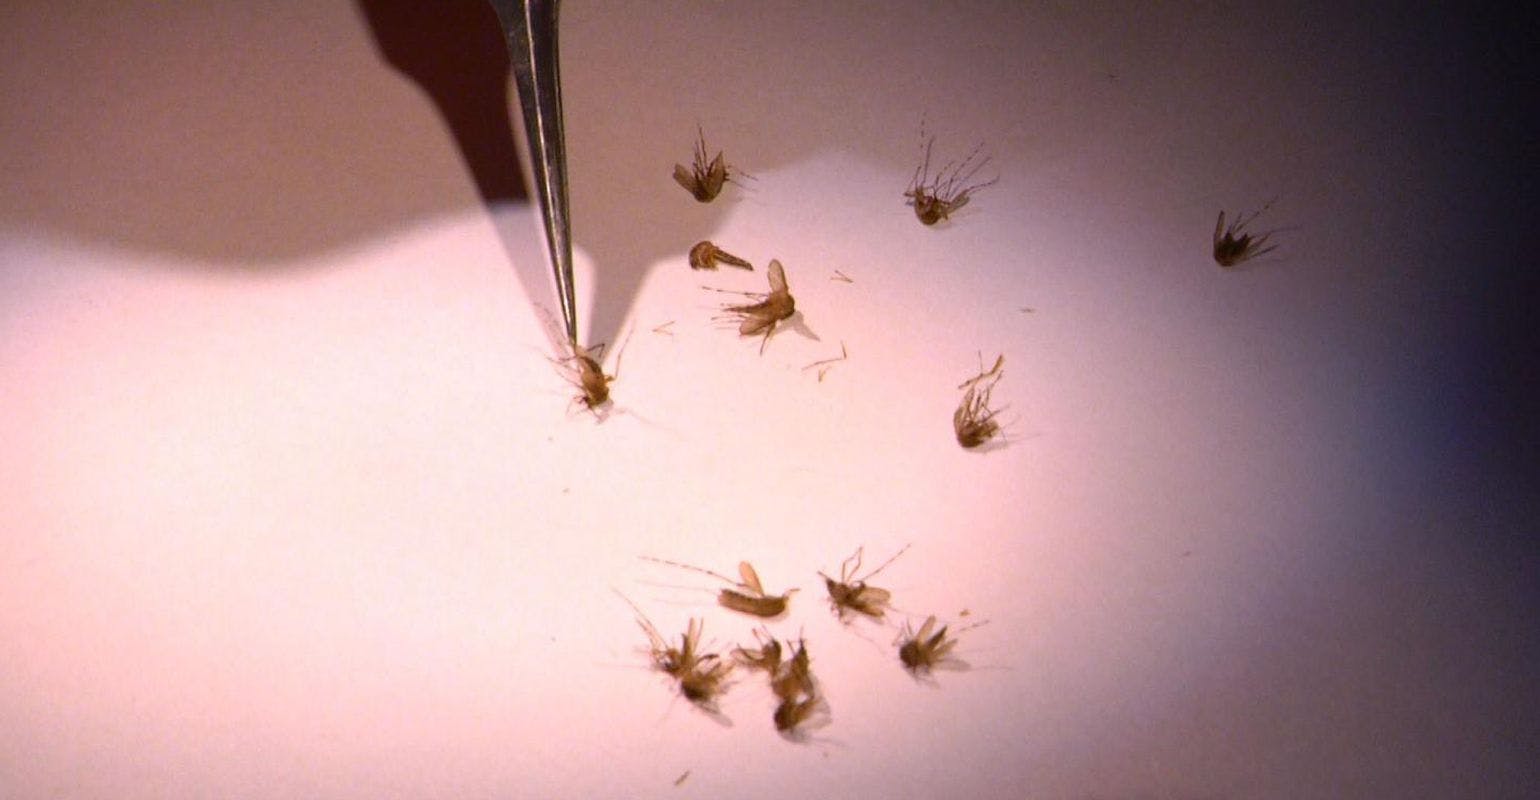 15 Years of Mosquito Data Implicate Species Most Likely to Transmit West Nile Virus in Iowa